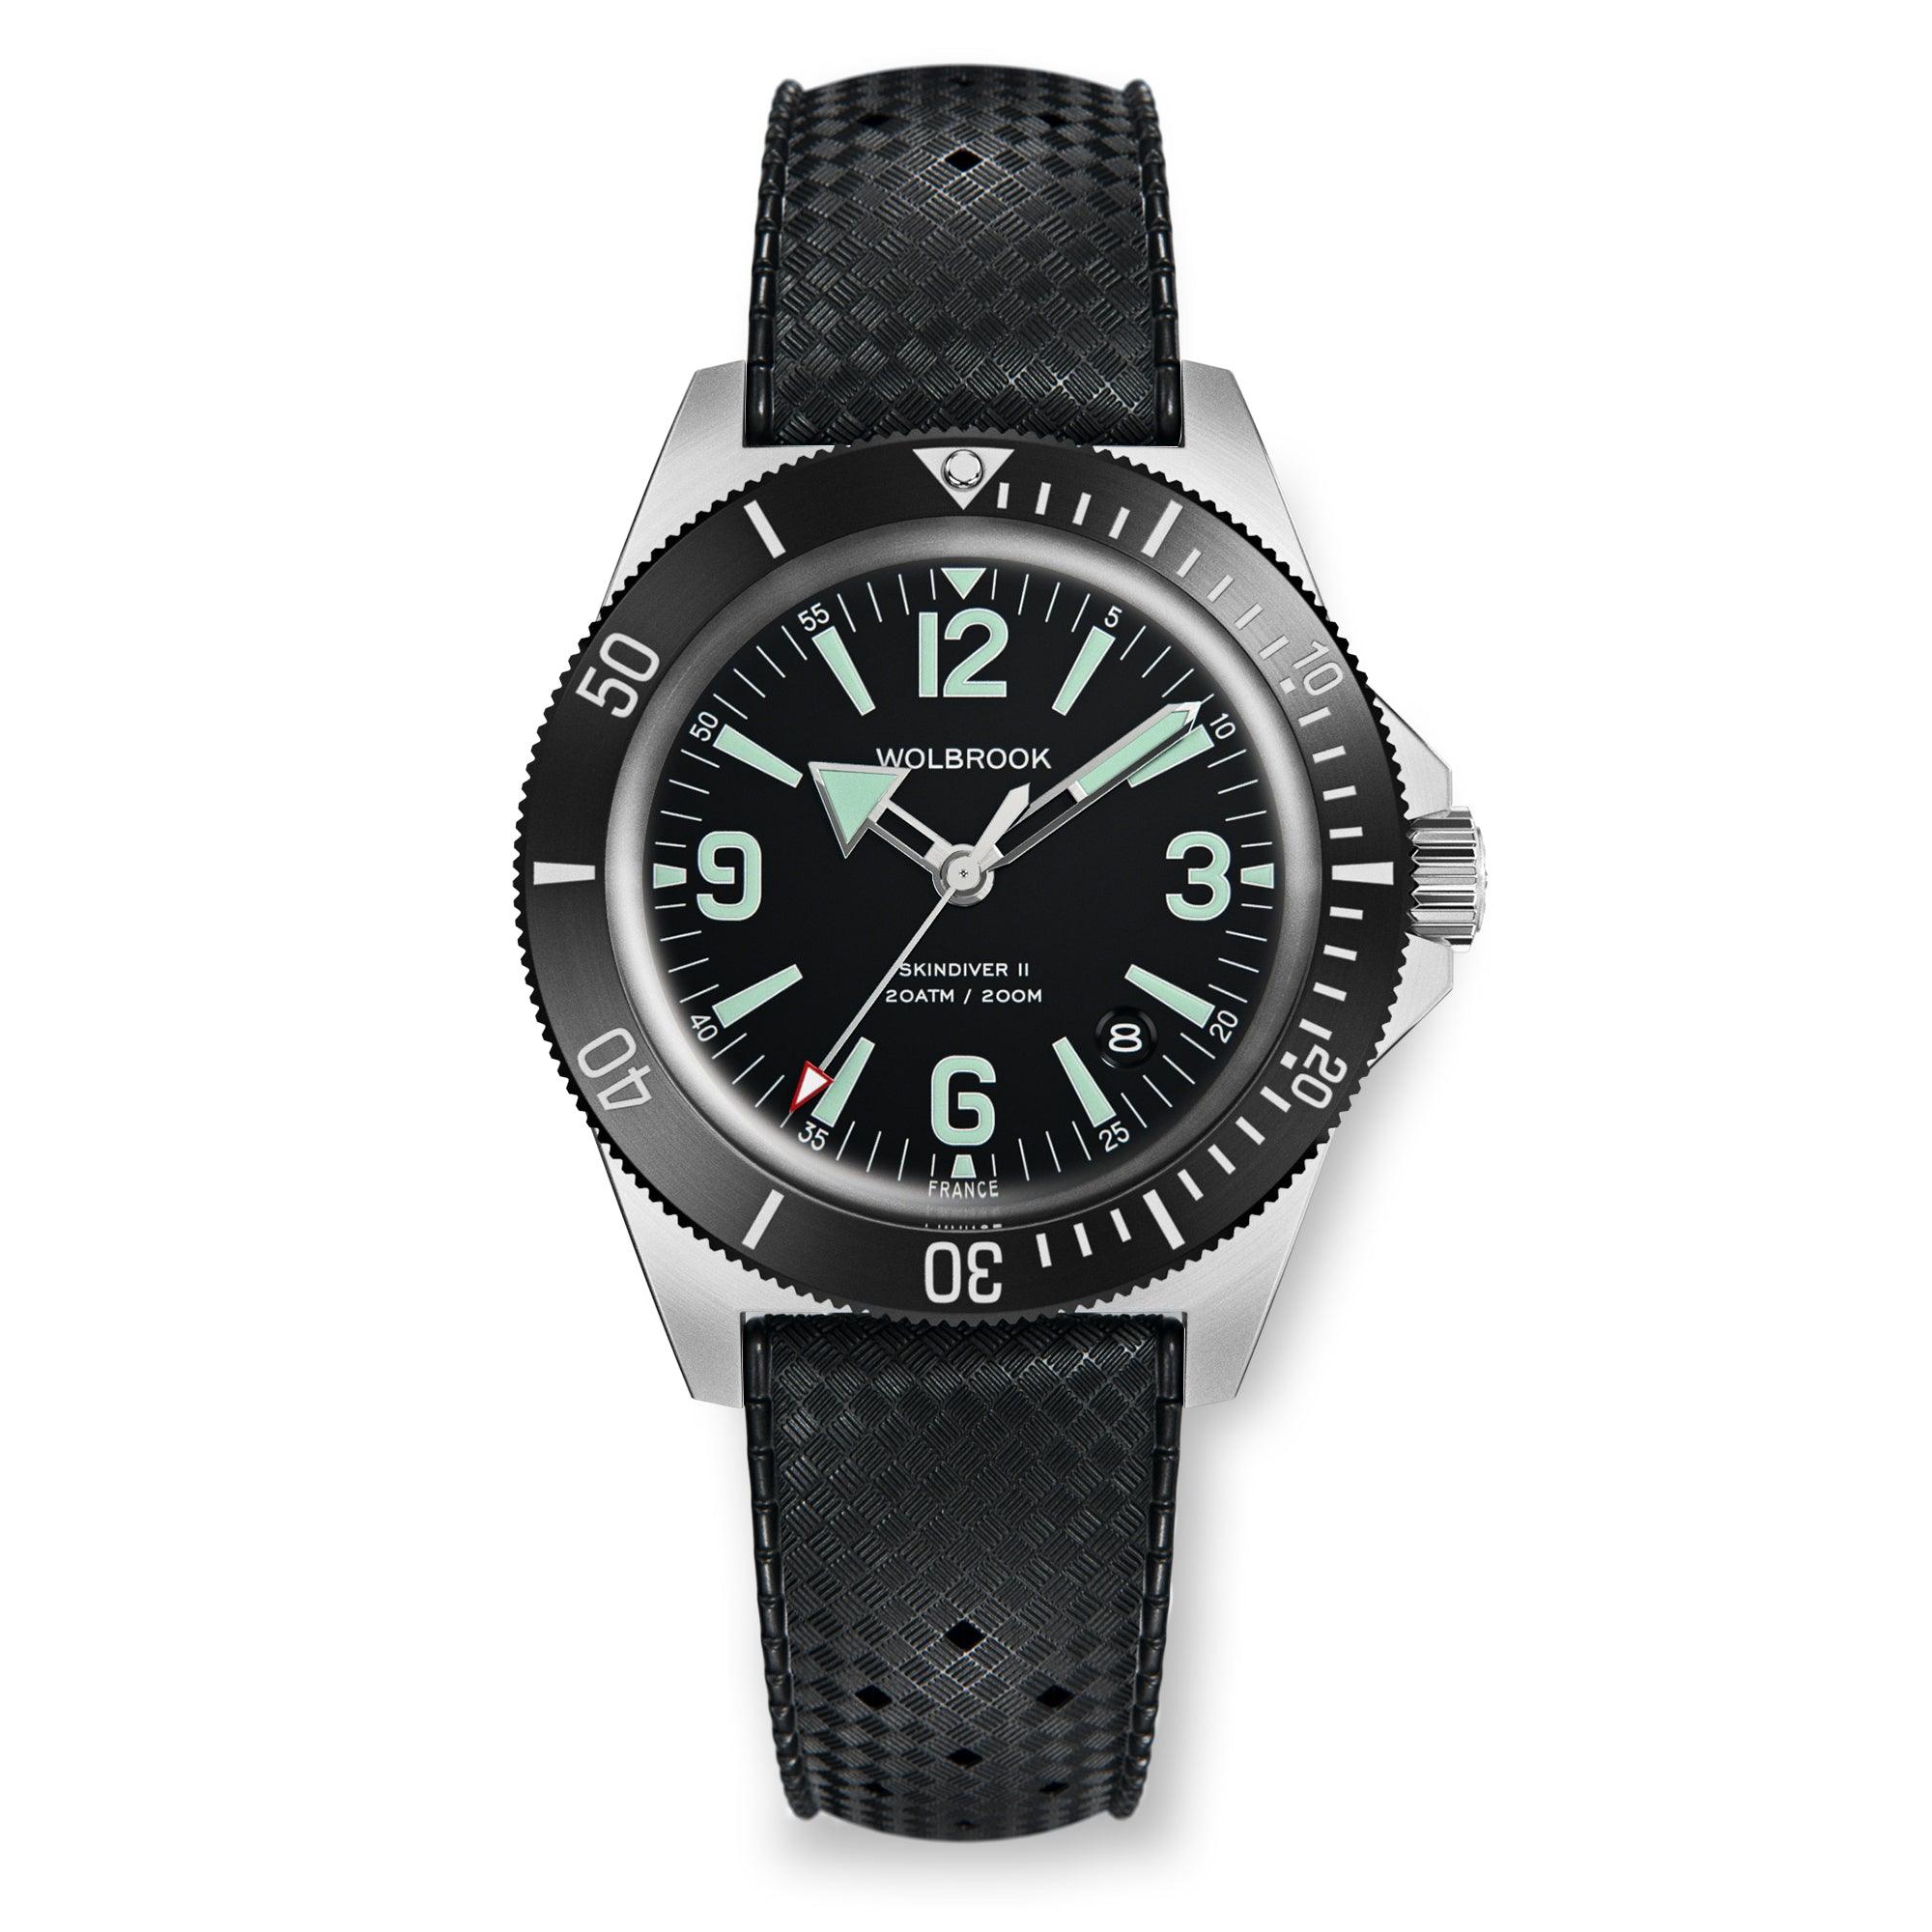 Skindiver II Automatic Dive Watch - Green Lum & Black Dial - Wolbrook Watches